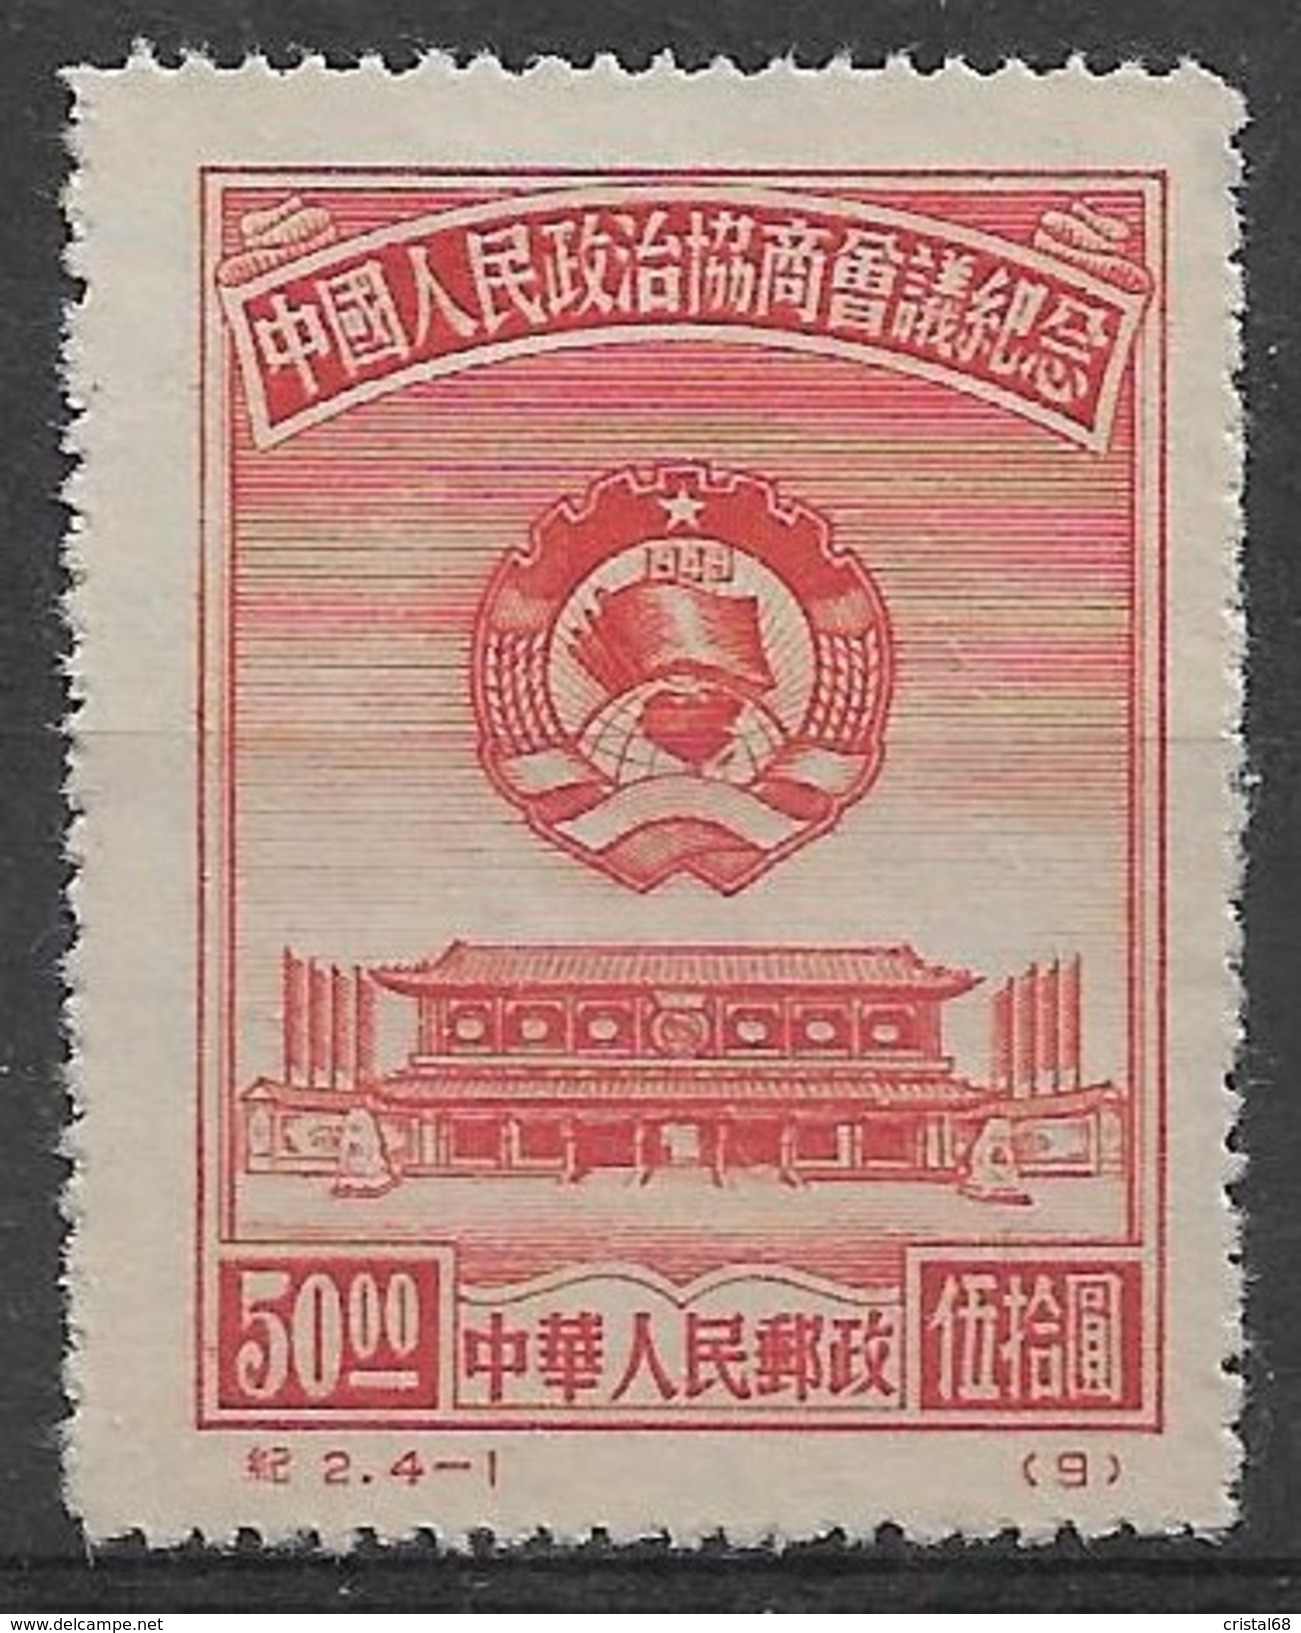 CHINE 1950 - Timbre N°827 - Neuf - Reimpresiones Oficiales